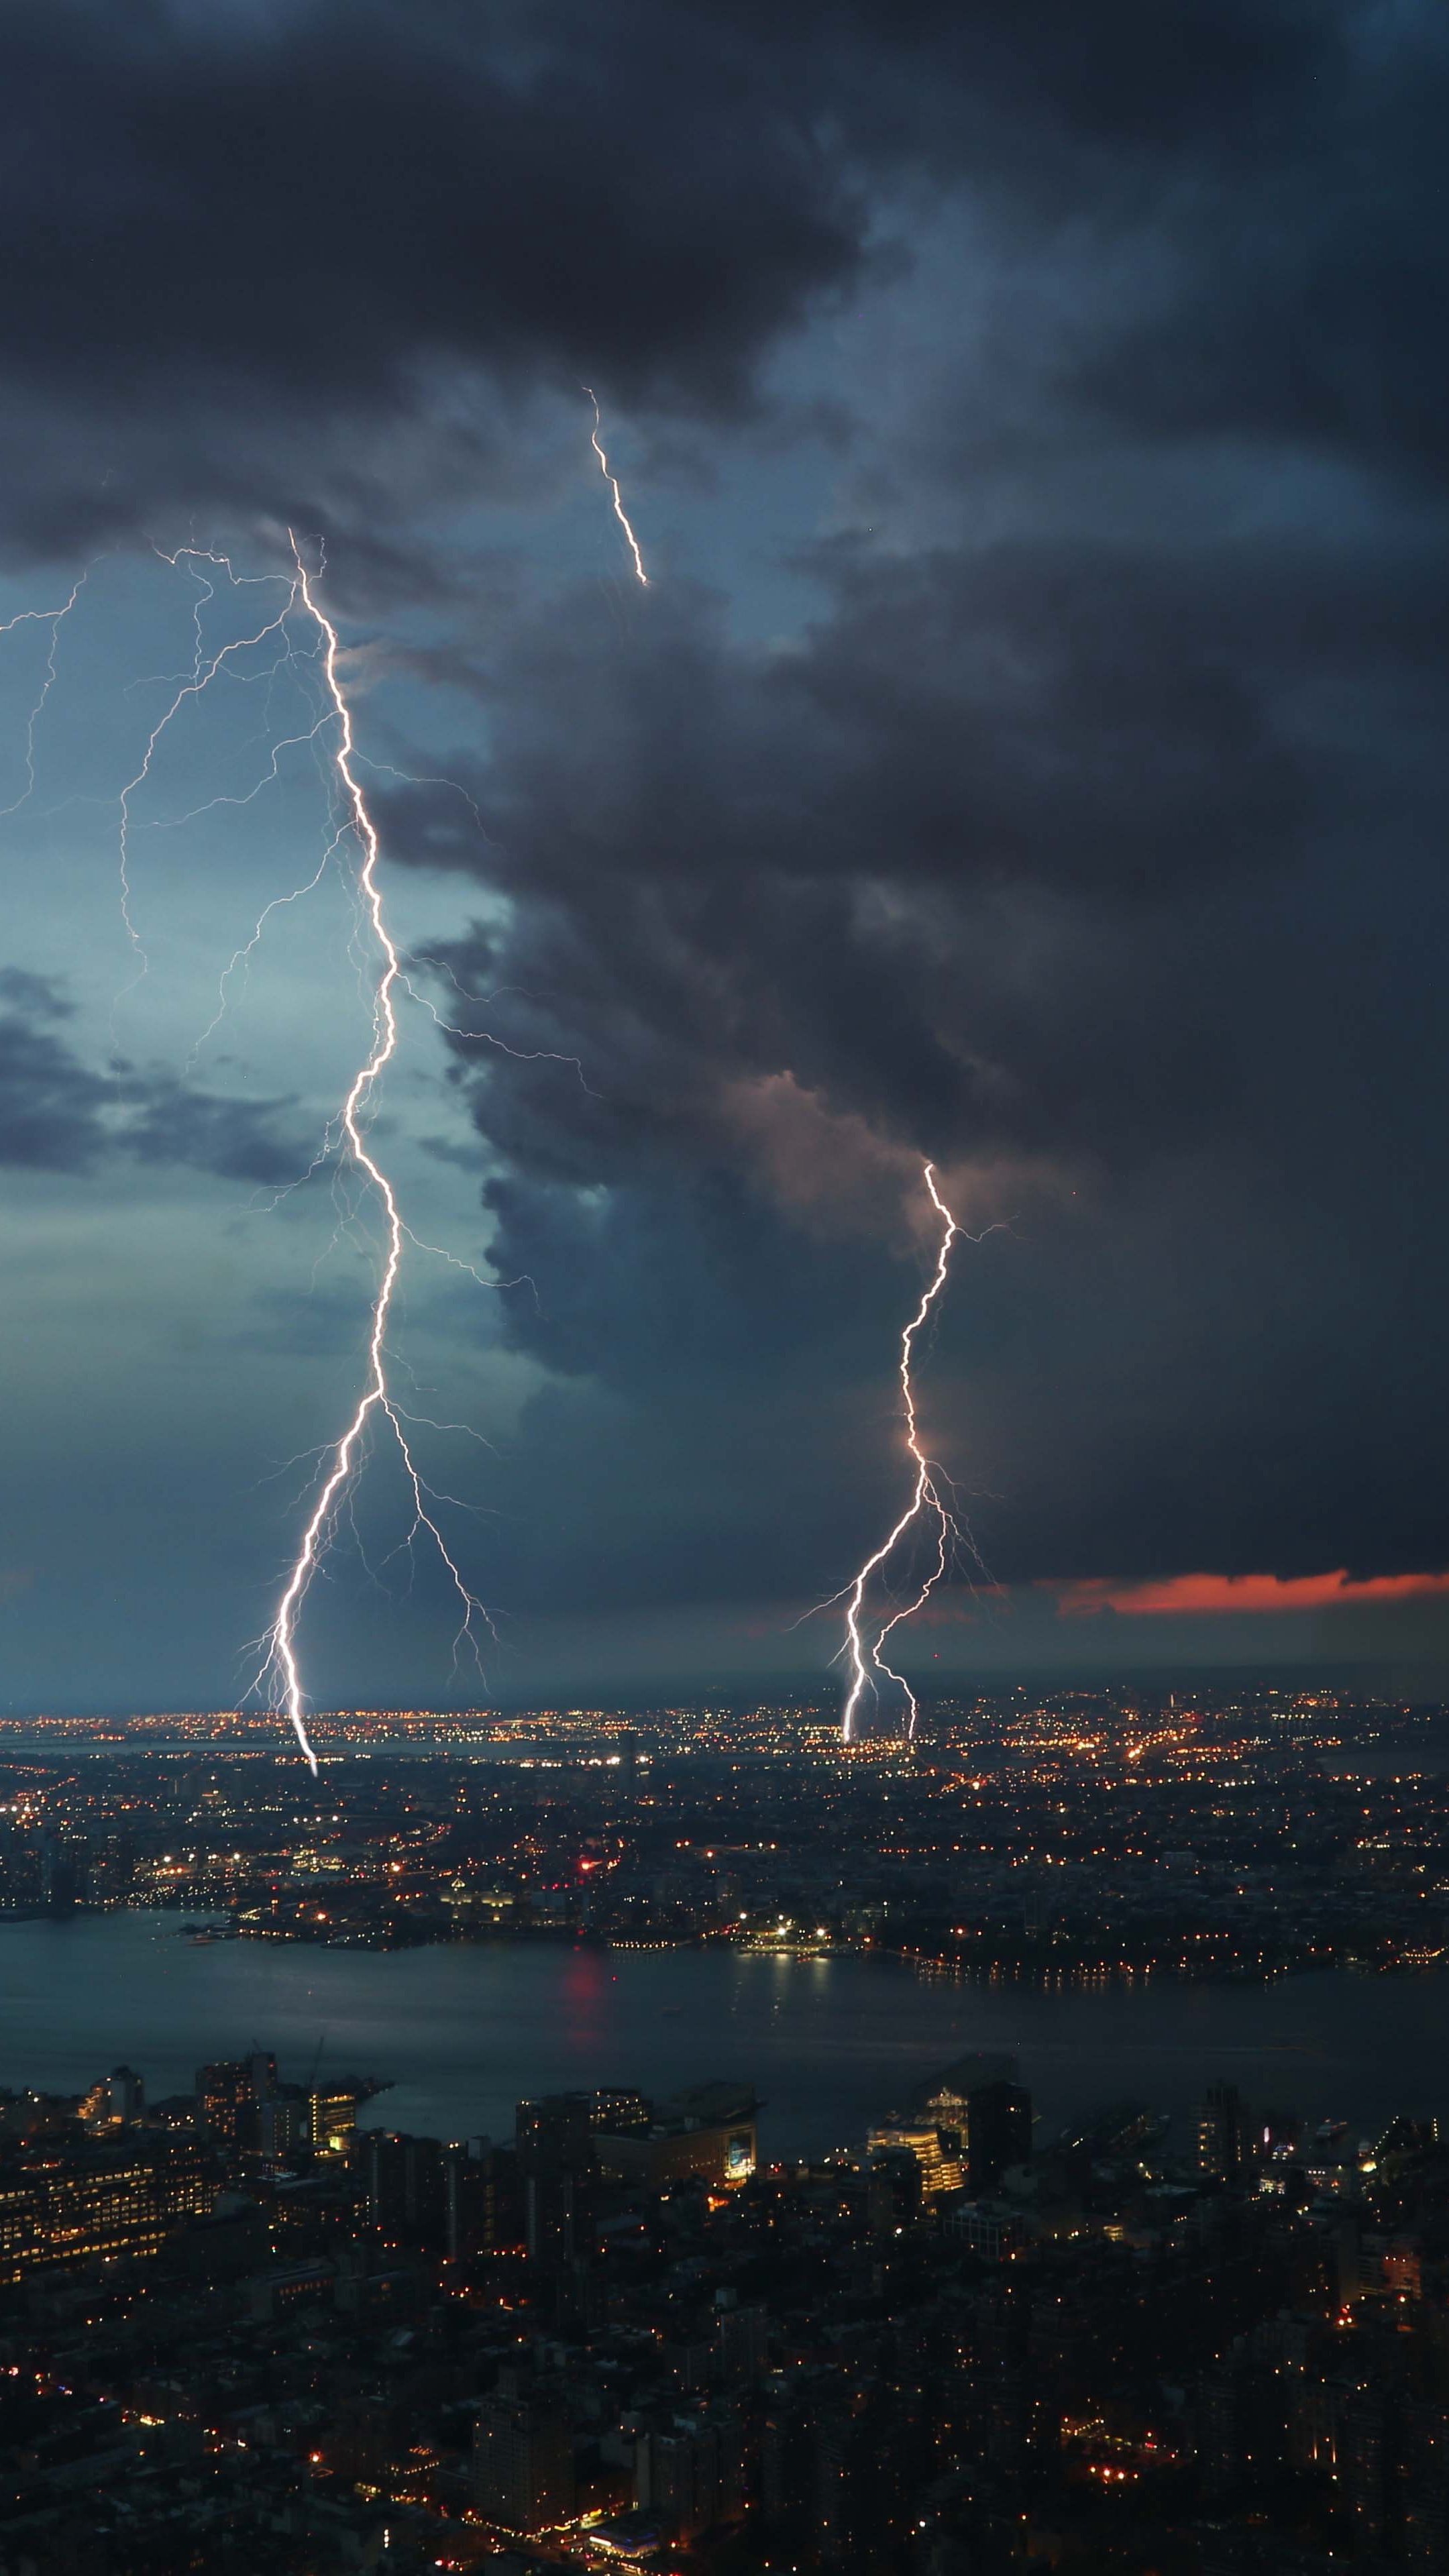 Places #nightcity #thunderstorm #topview #wallpaper HD 4k